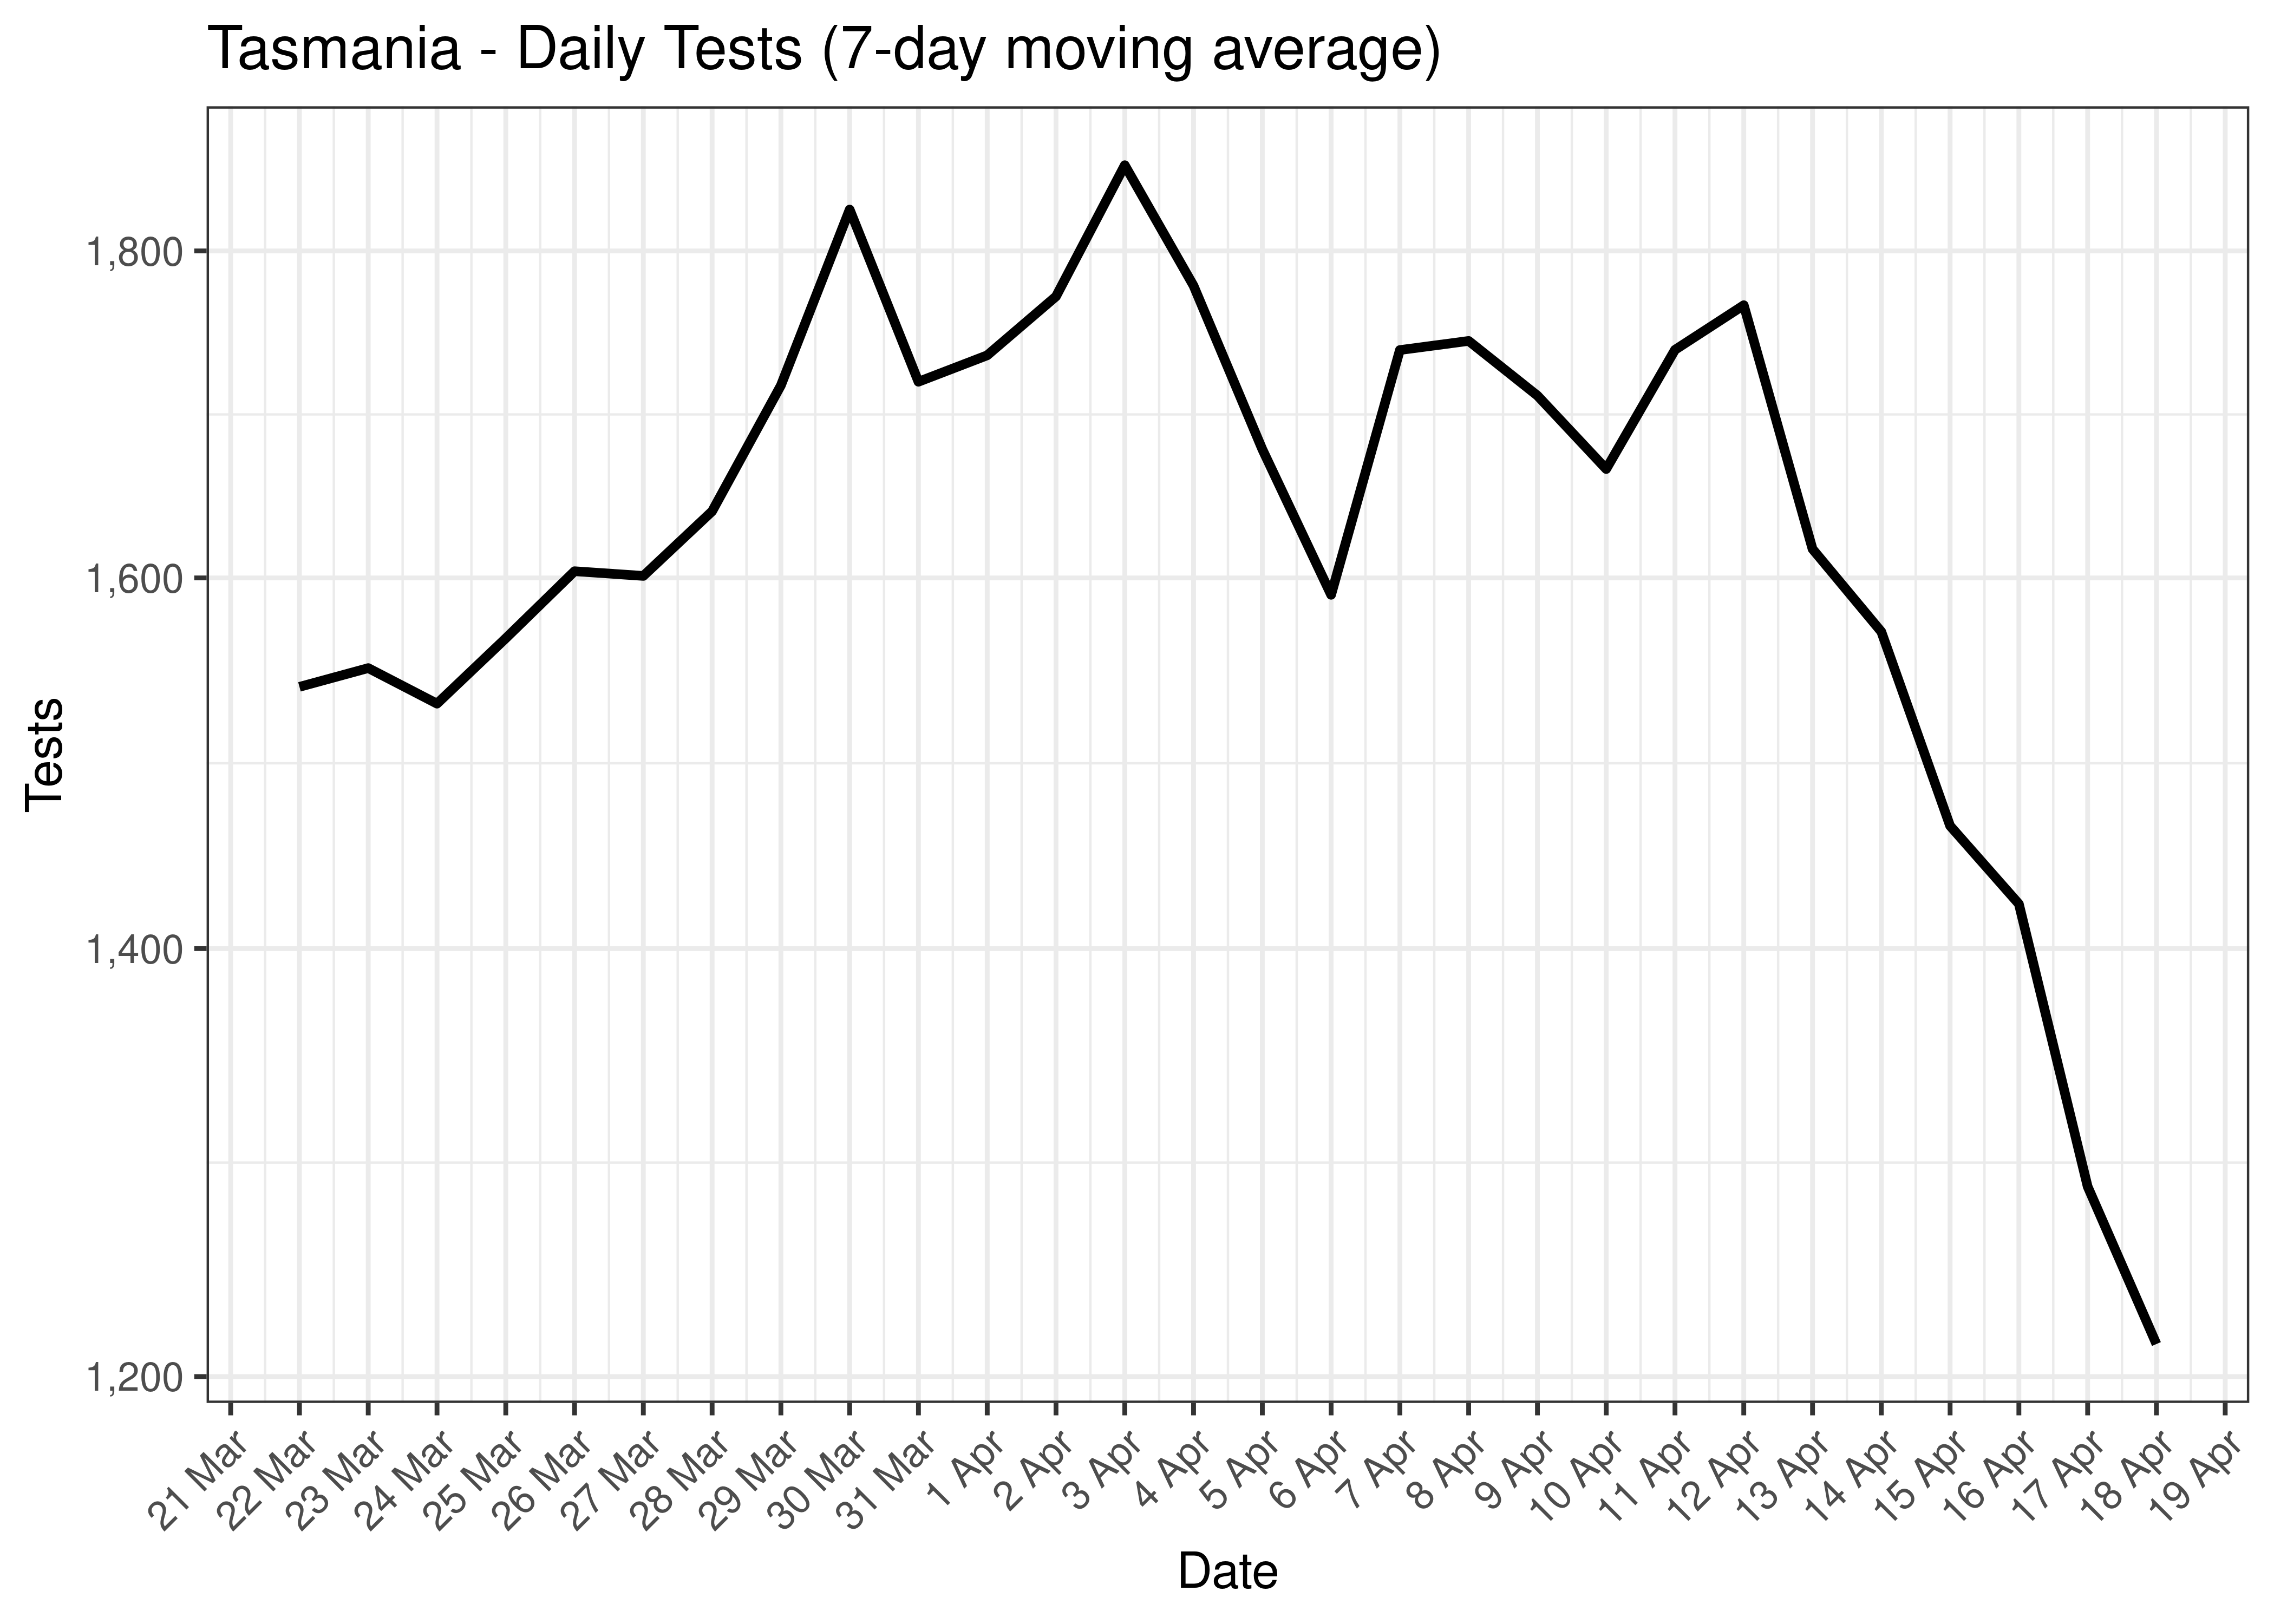 Tasmania - Daily Tests for Last 30 Days (7-day moving average)